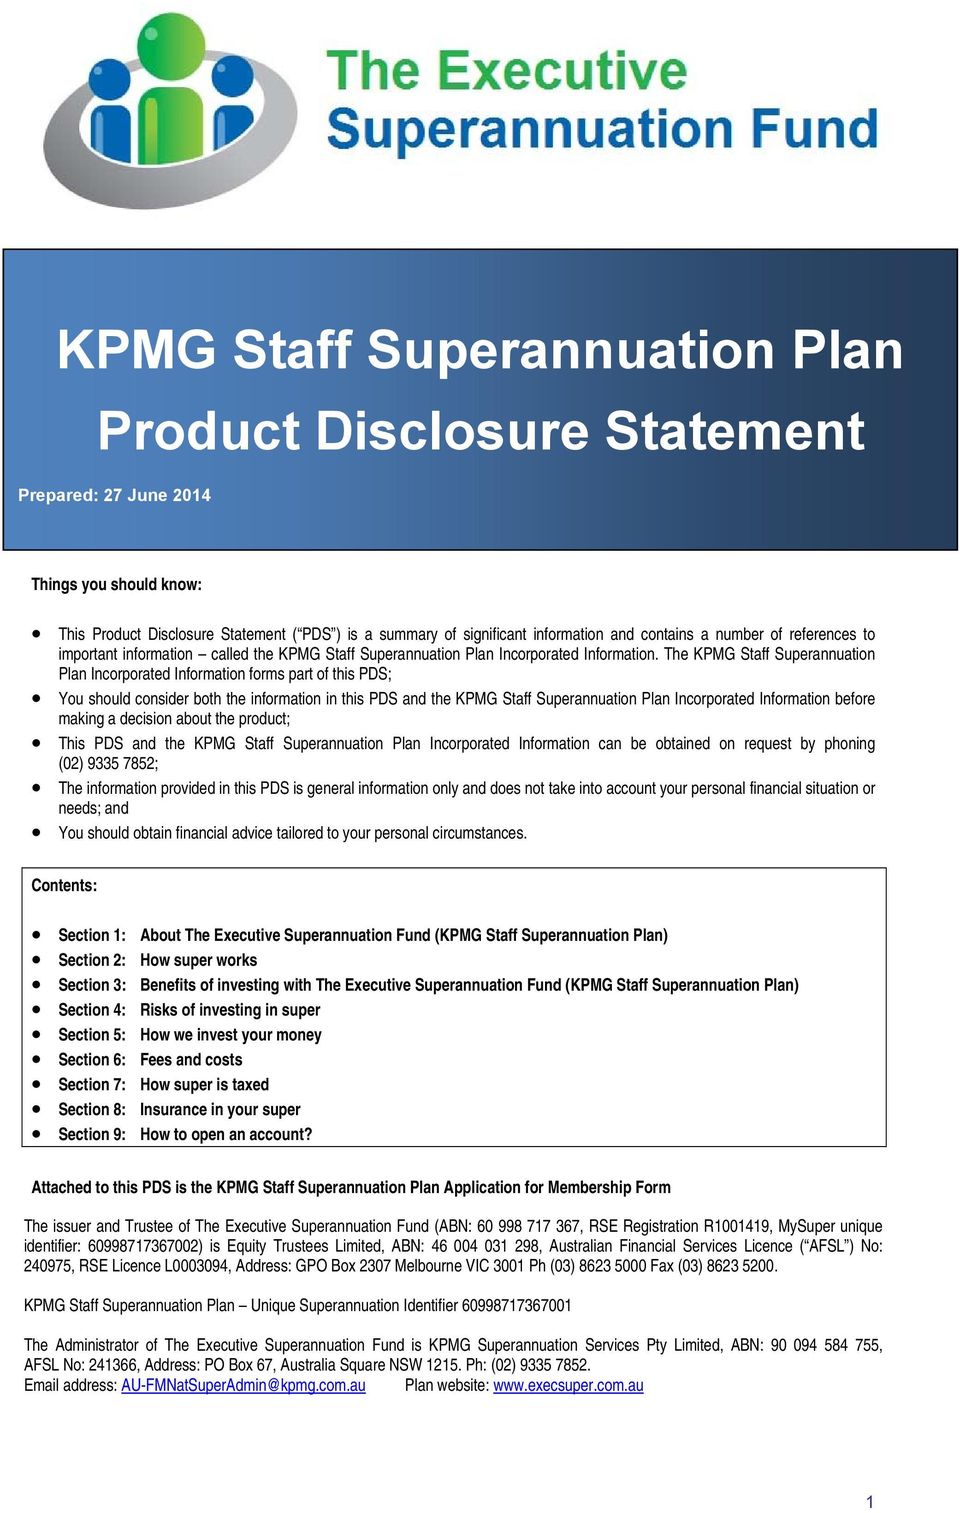 The KPMG Staff Superannuation Plan Incorporated Information forms part of this PDS; You should consider both the information in this PDS and the KPMG Staff Superannuation Plan Incorporated